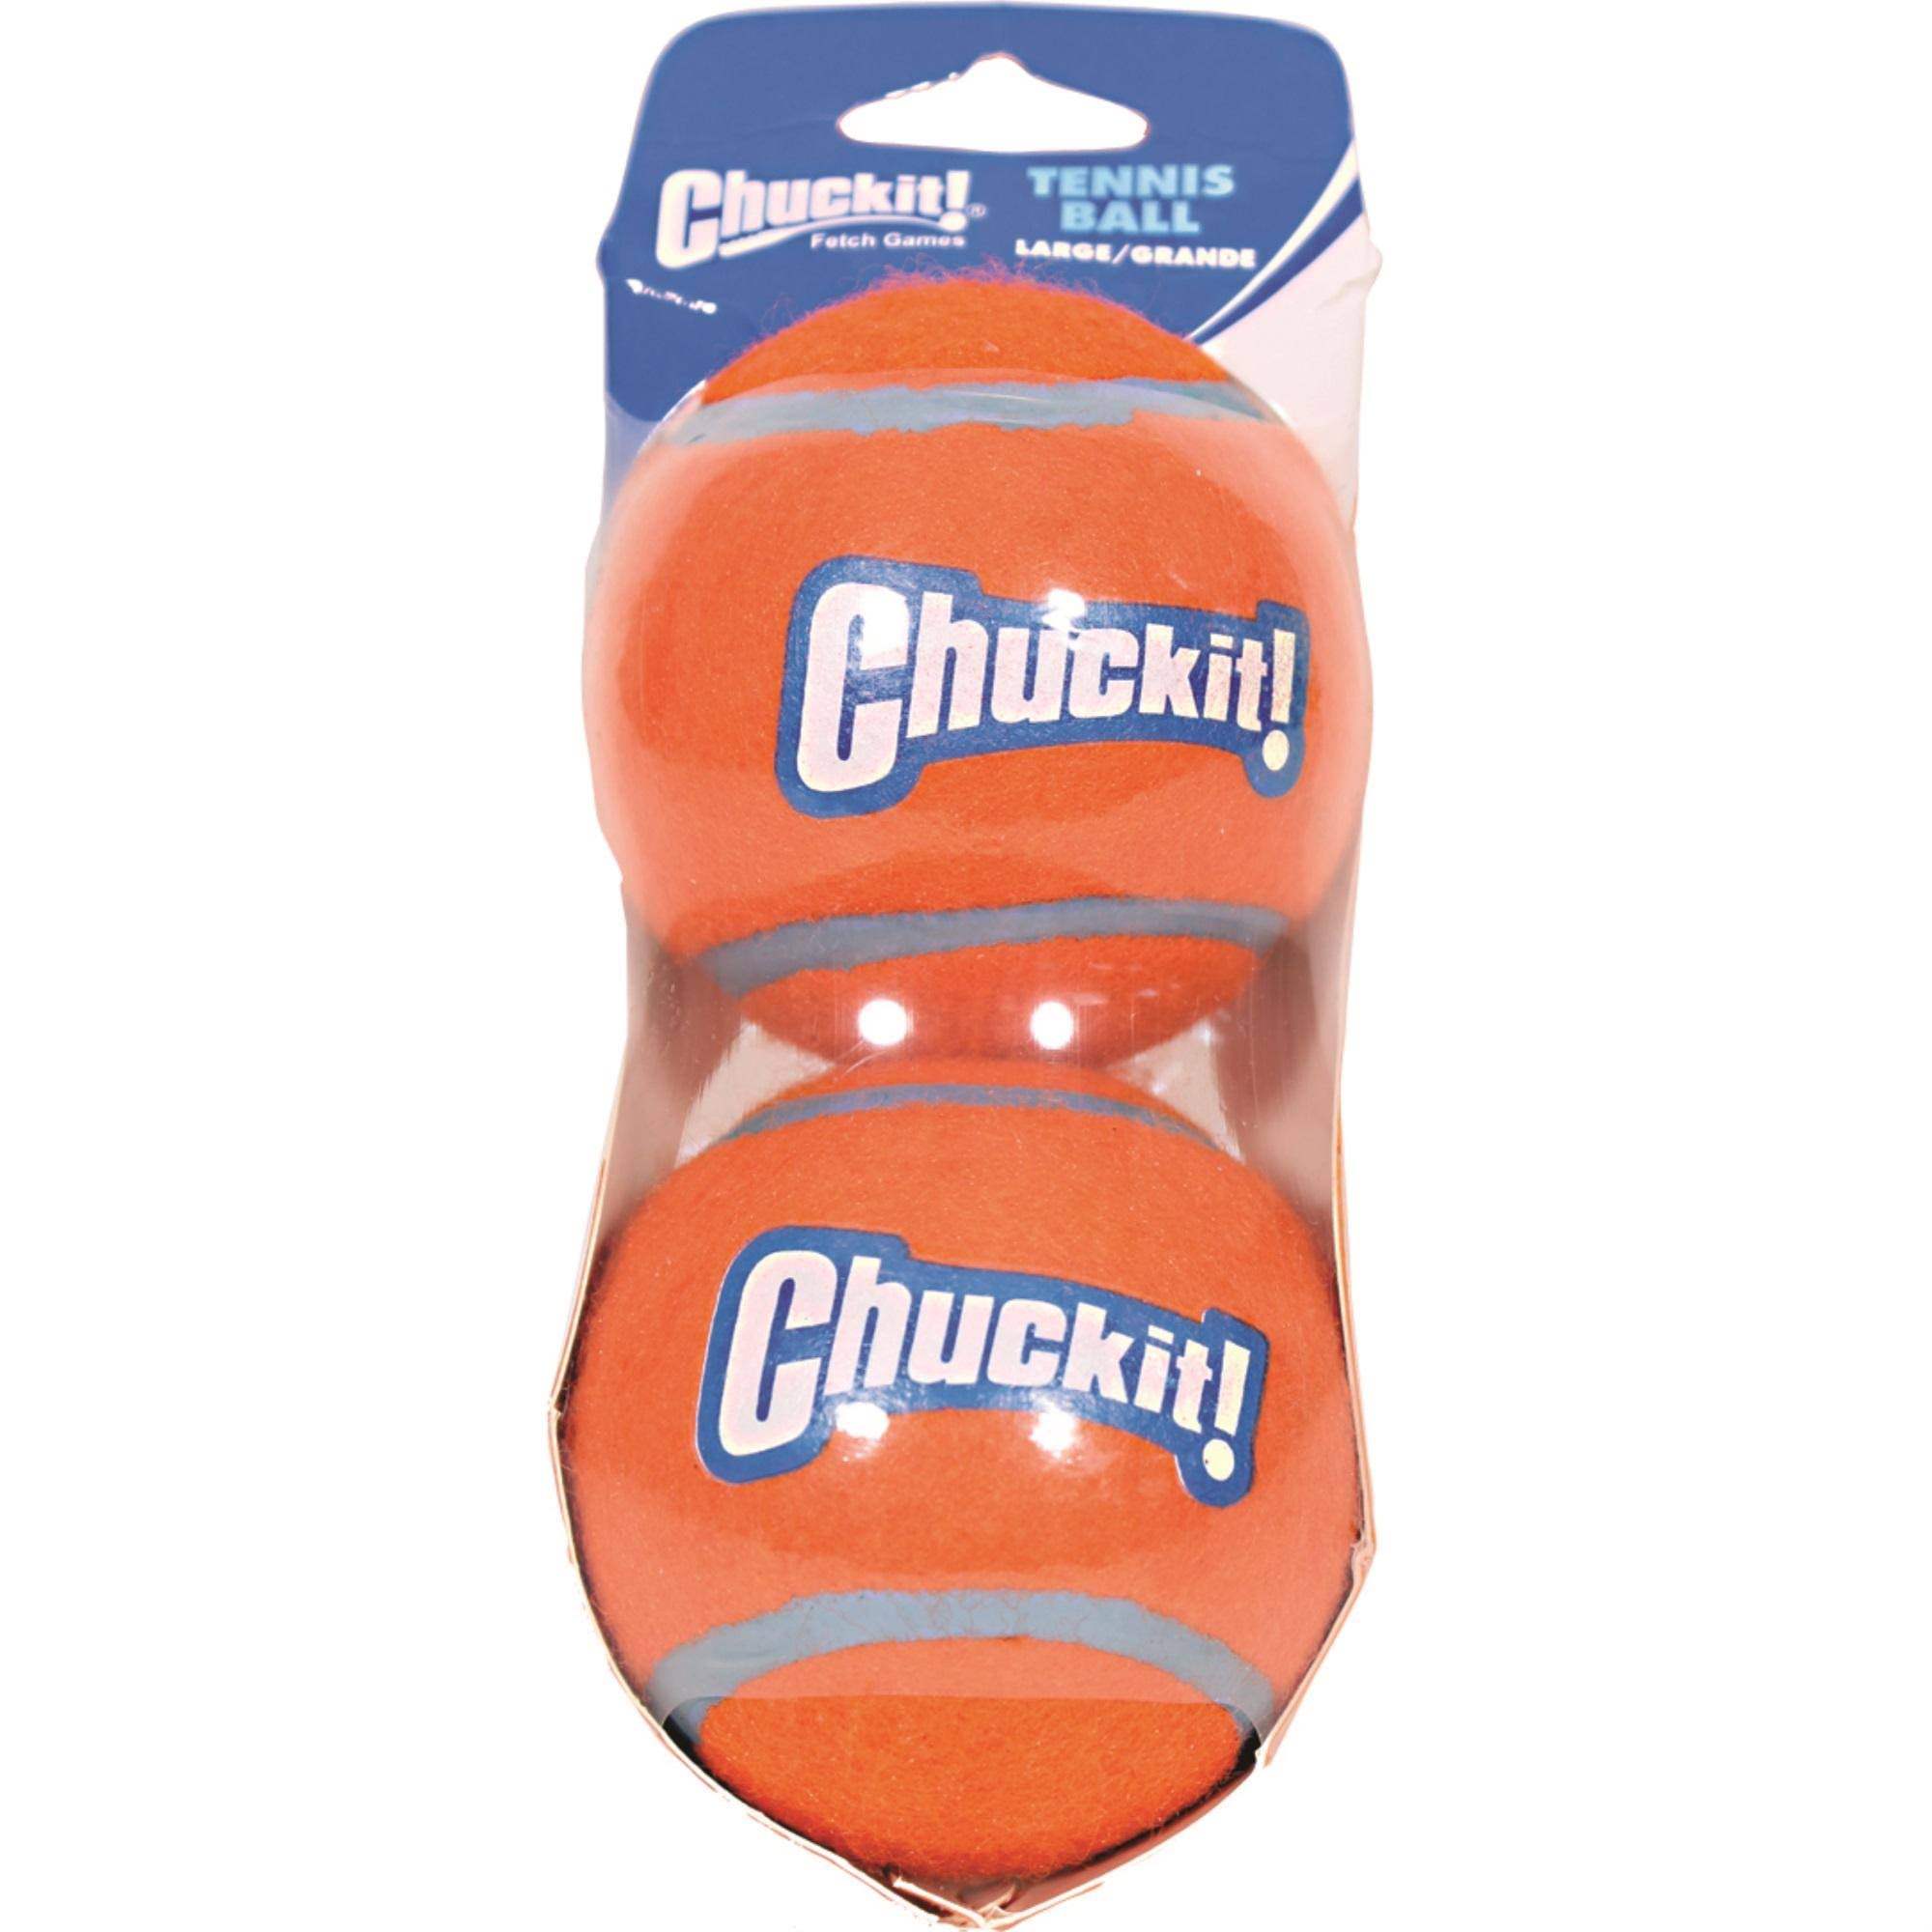 Chuckit! Large Tennis Ball Dog Toy - 2 Pack